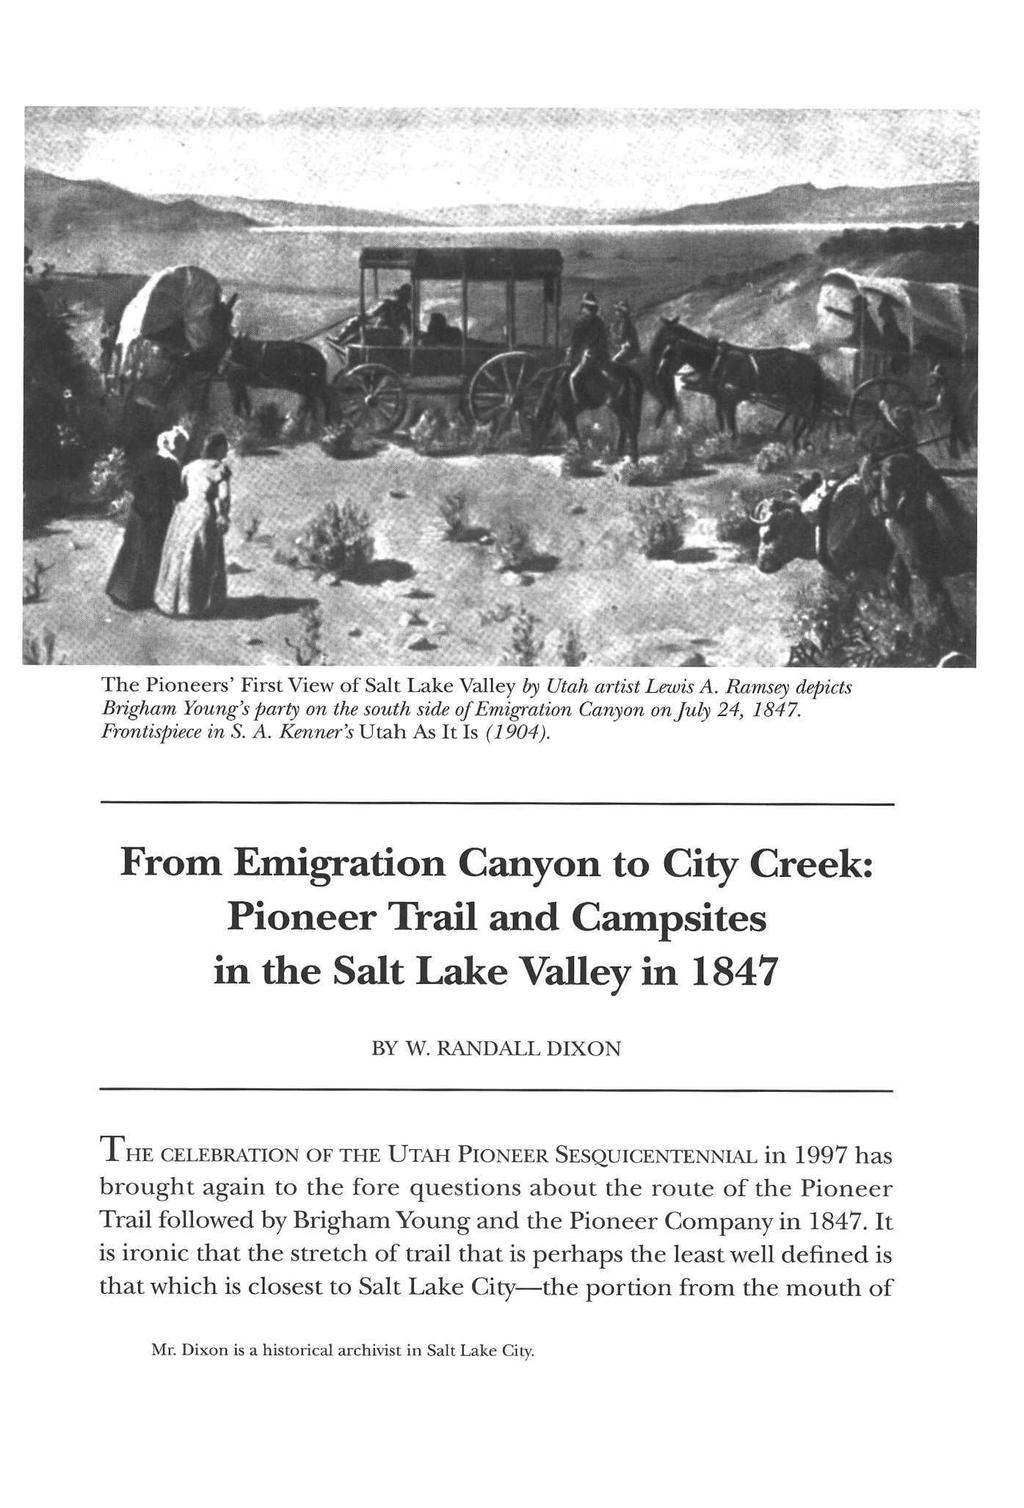 The Pioneers' First View of Salt Lake Valley by Utah artist Lewis A. Ramsey depicts Brigham Young's party on the south side of Emigration Canyon onjuly 24, 1847. Frontispiece in S. A. Kenner's Utah As It Is (1904).